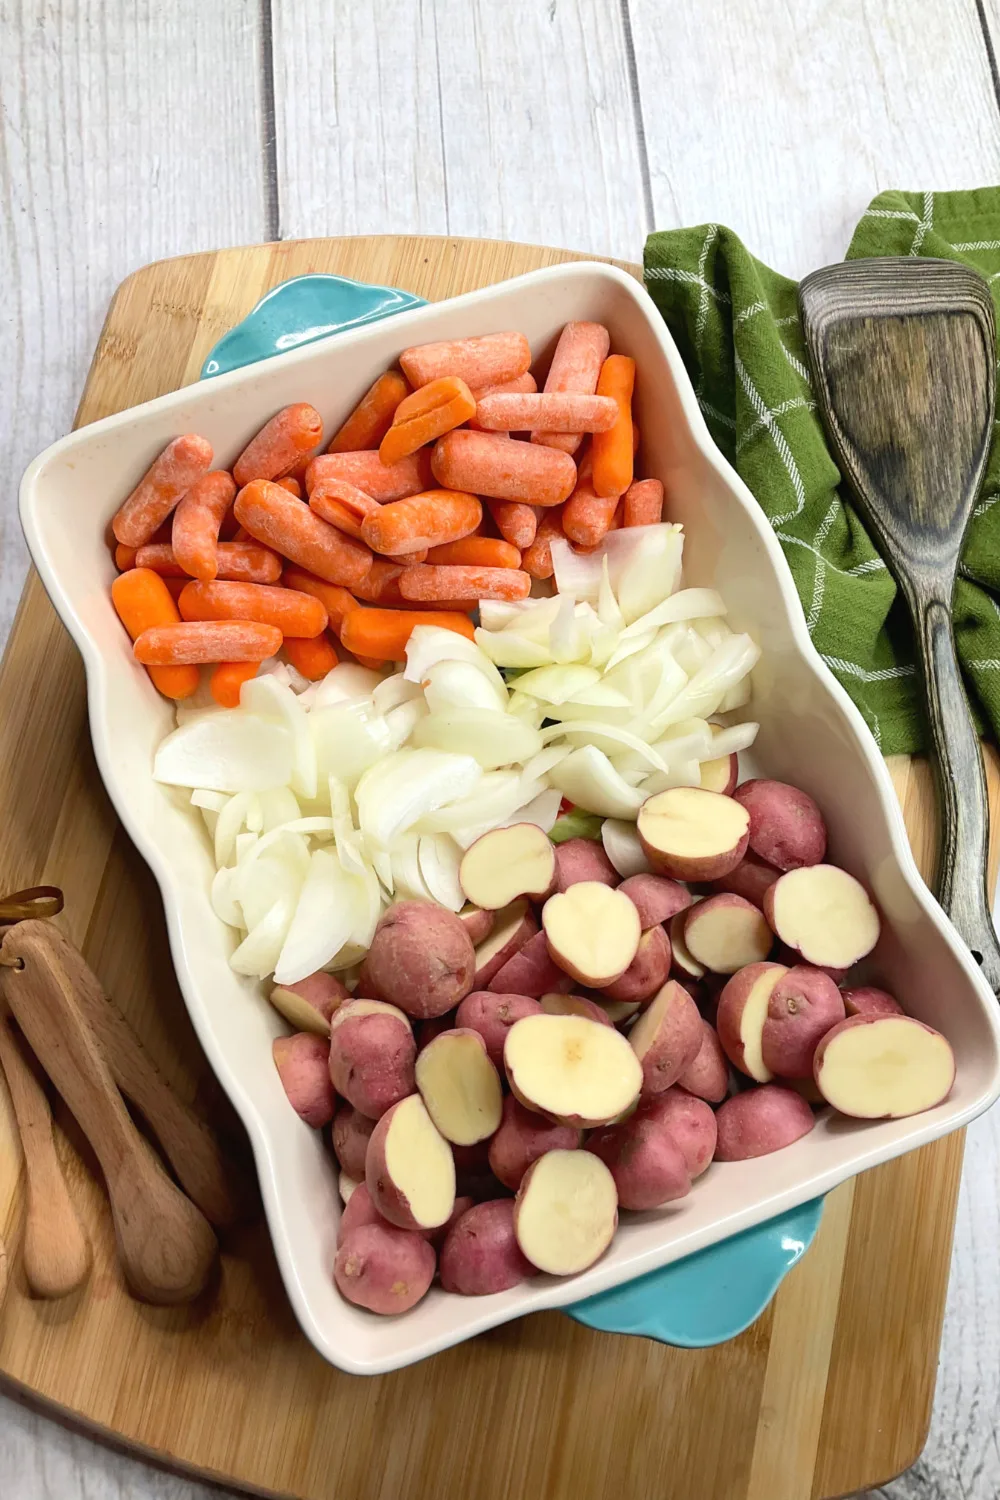 Platter of carrots, onions, and potatoes